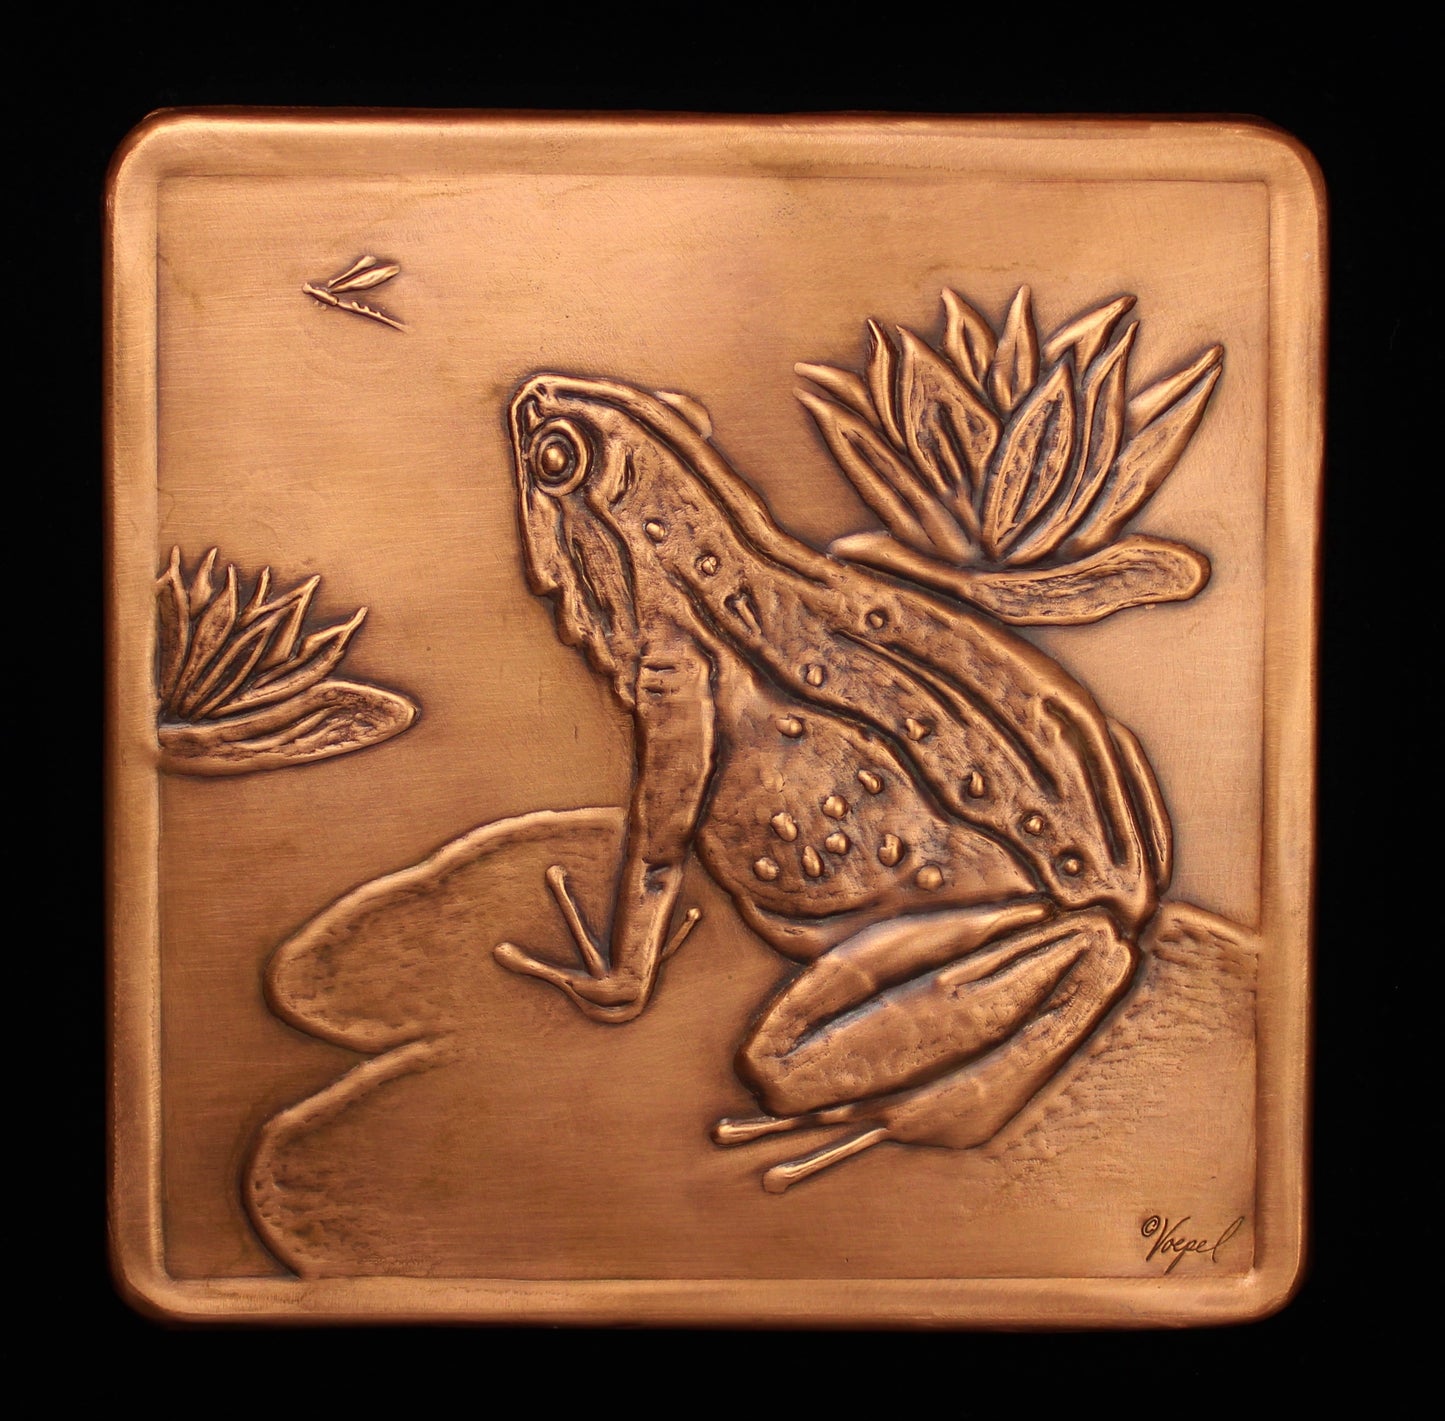 Frog and Water Lilies Copper Tile, 9" x 9" x 1/4"